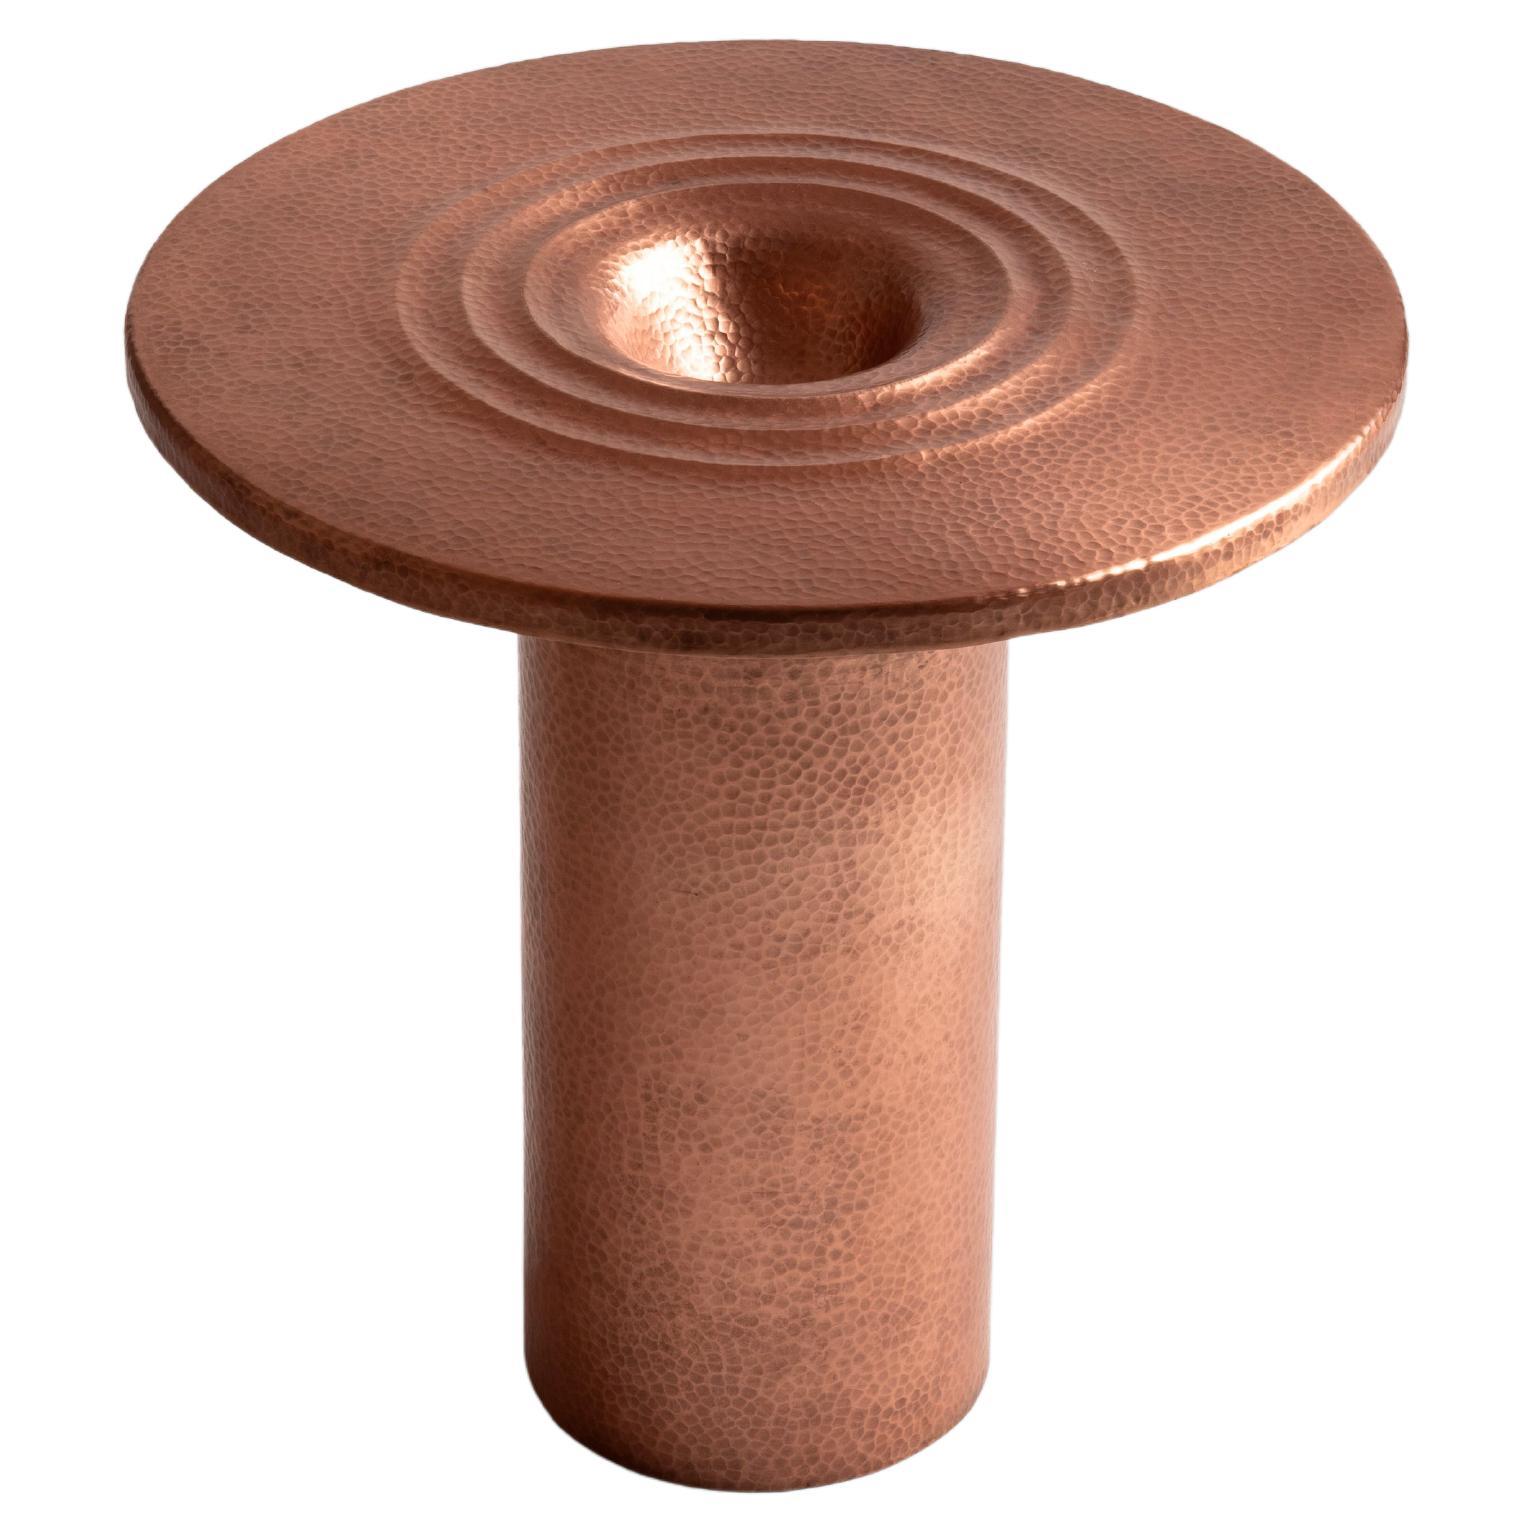 Contemporary side table, hammered copper, Mexican design by Sebastian Arroyo For Sale